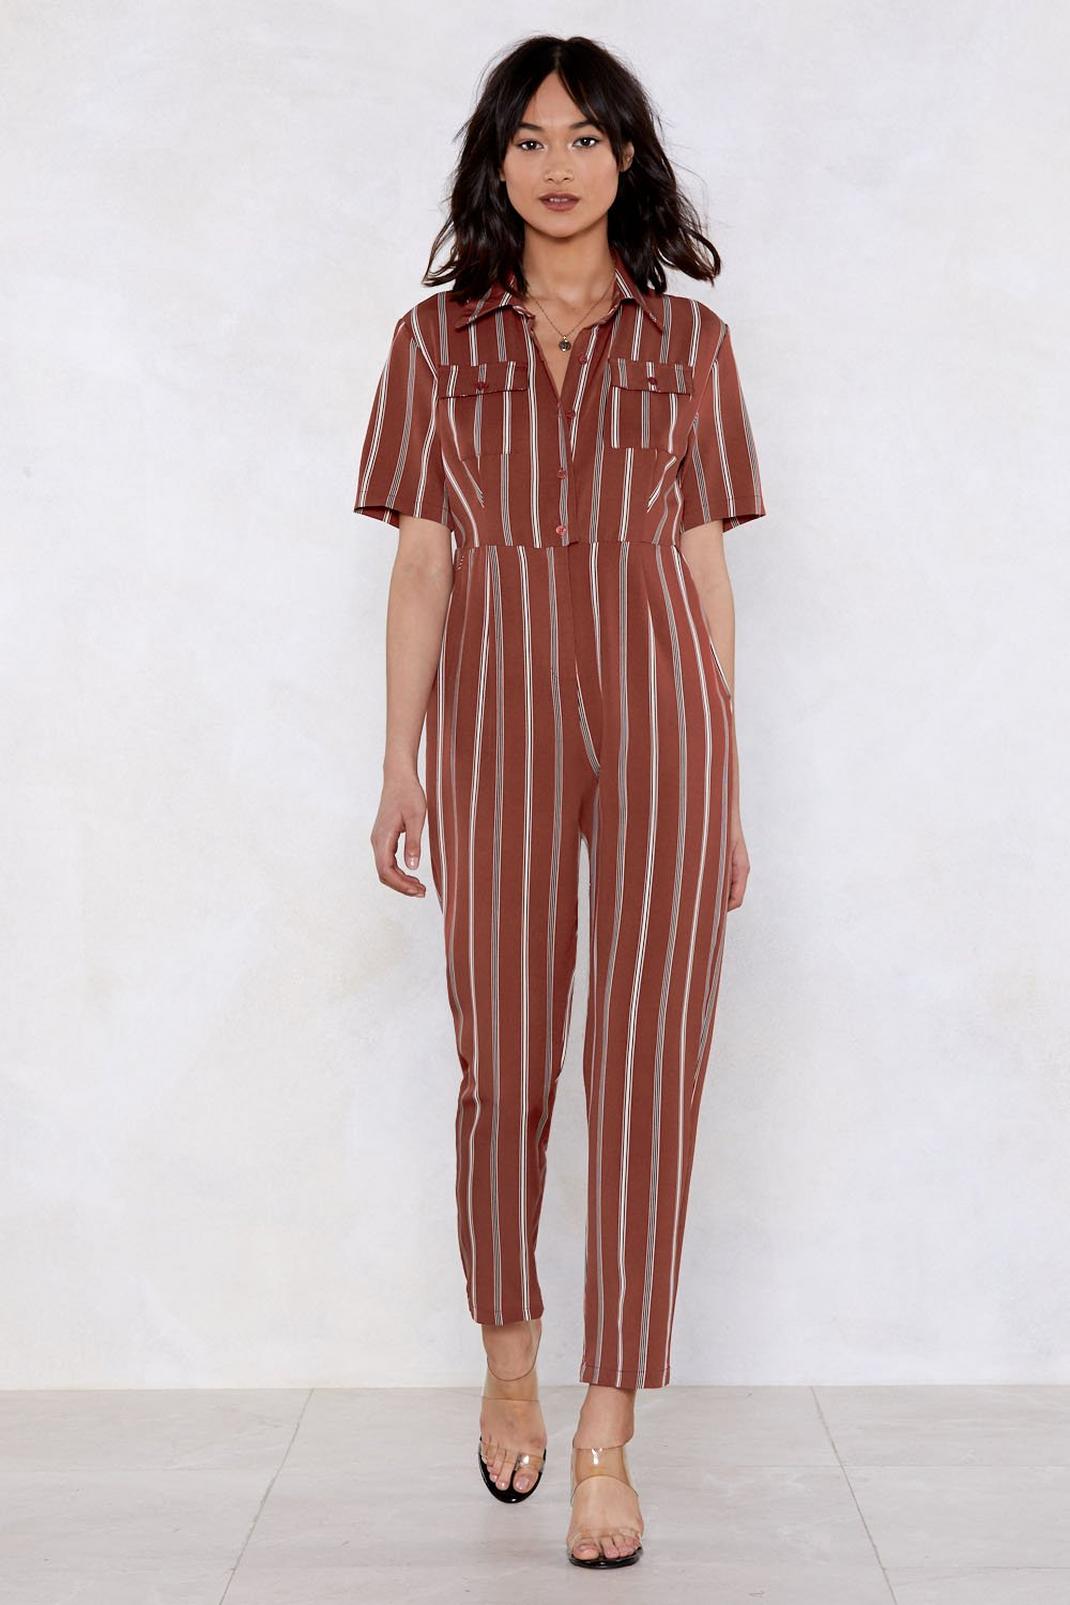 You Are Utility Beautiful Babe Striped Jumpsuit